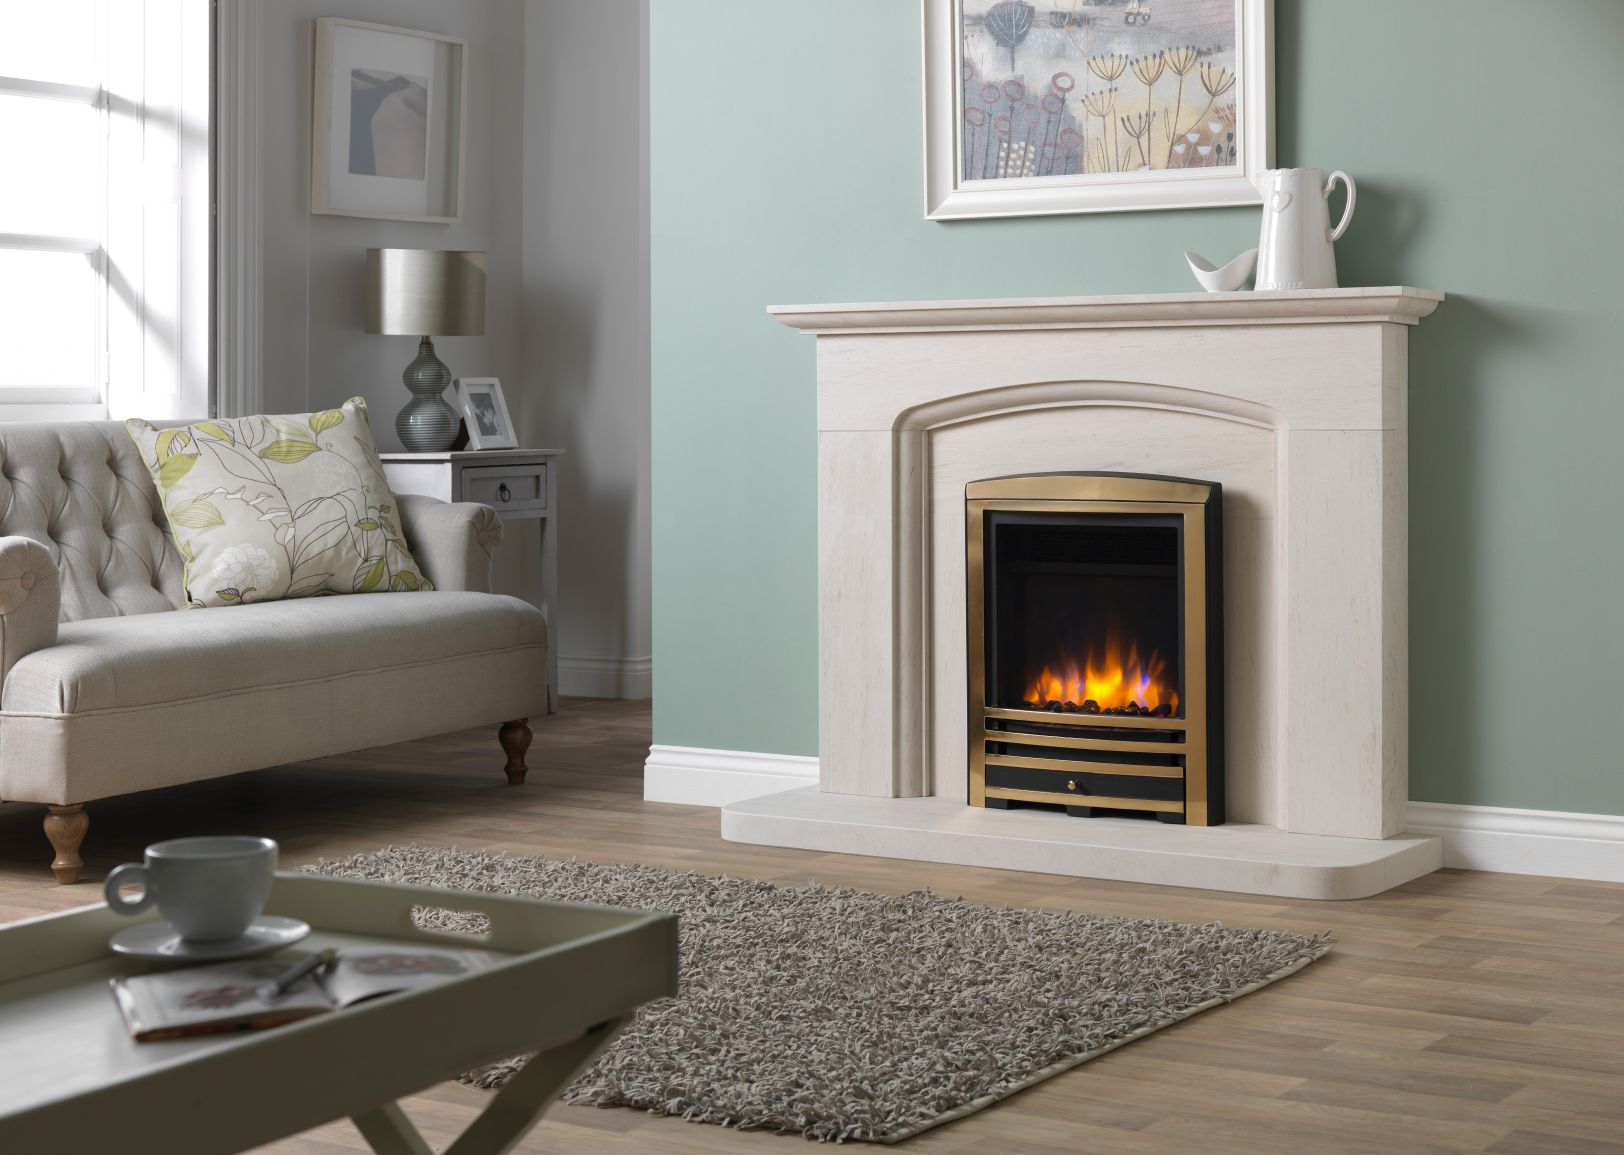 3D Ecoflame Inset Electric Fire with Cast Front in Electric Fireplace Surround